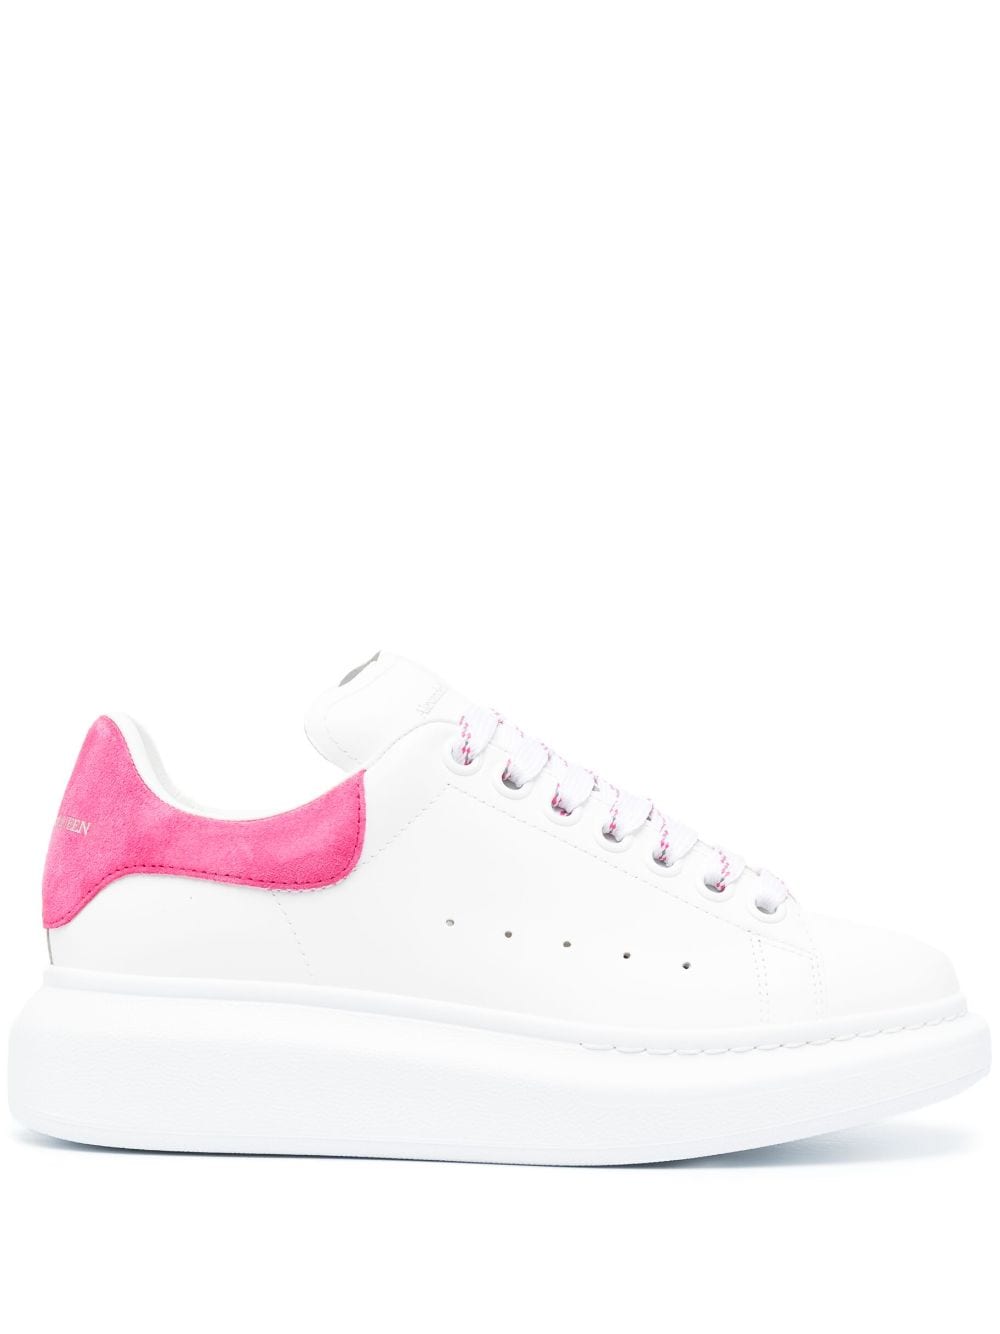 White/fuchsia leather/suede oversized low-top sneakers